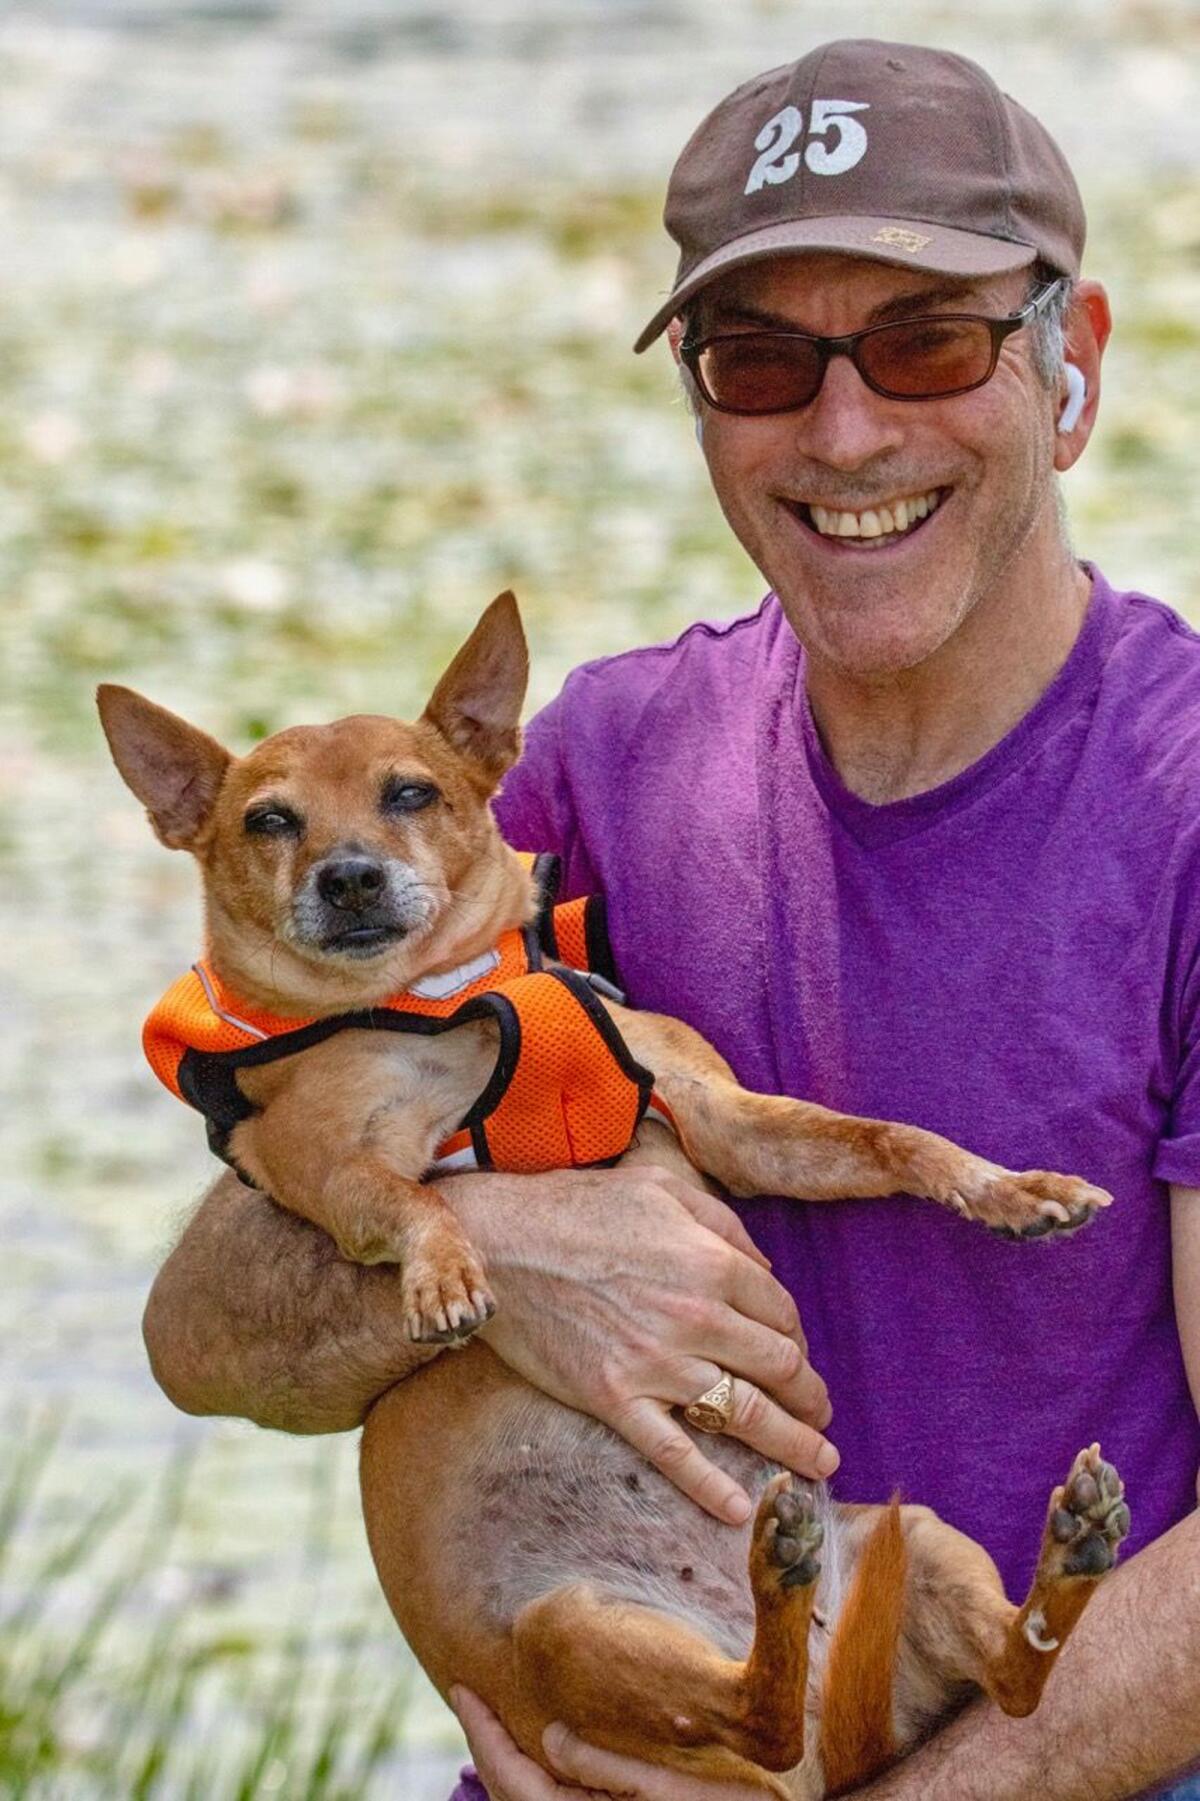 New York composer Ricky Ian Gordon with his dog Lucy.  